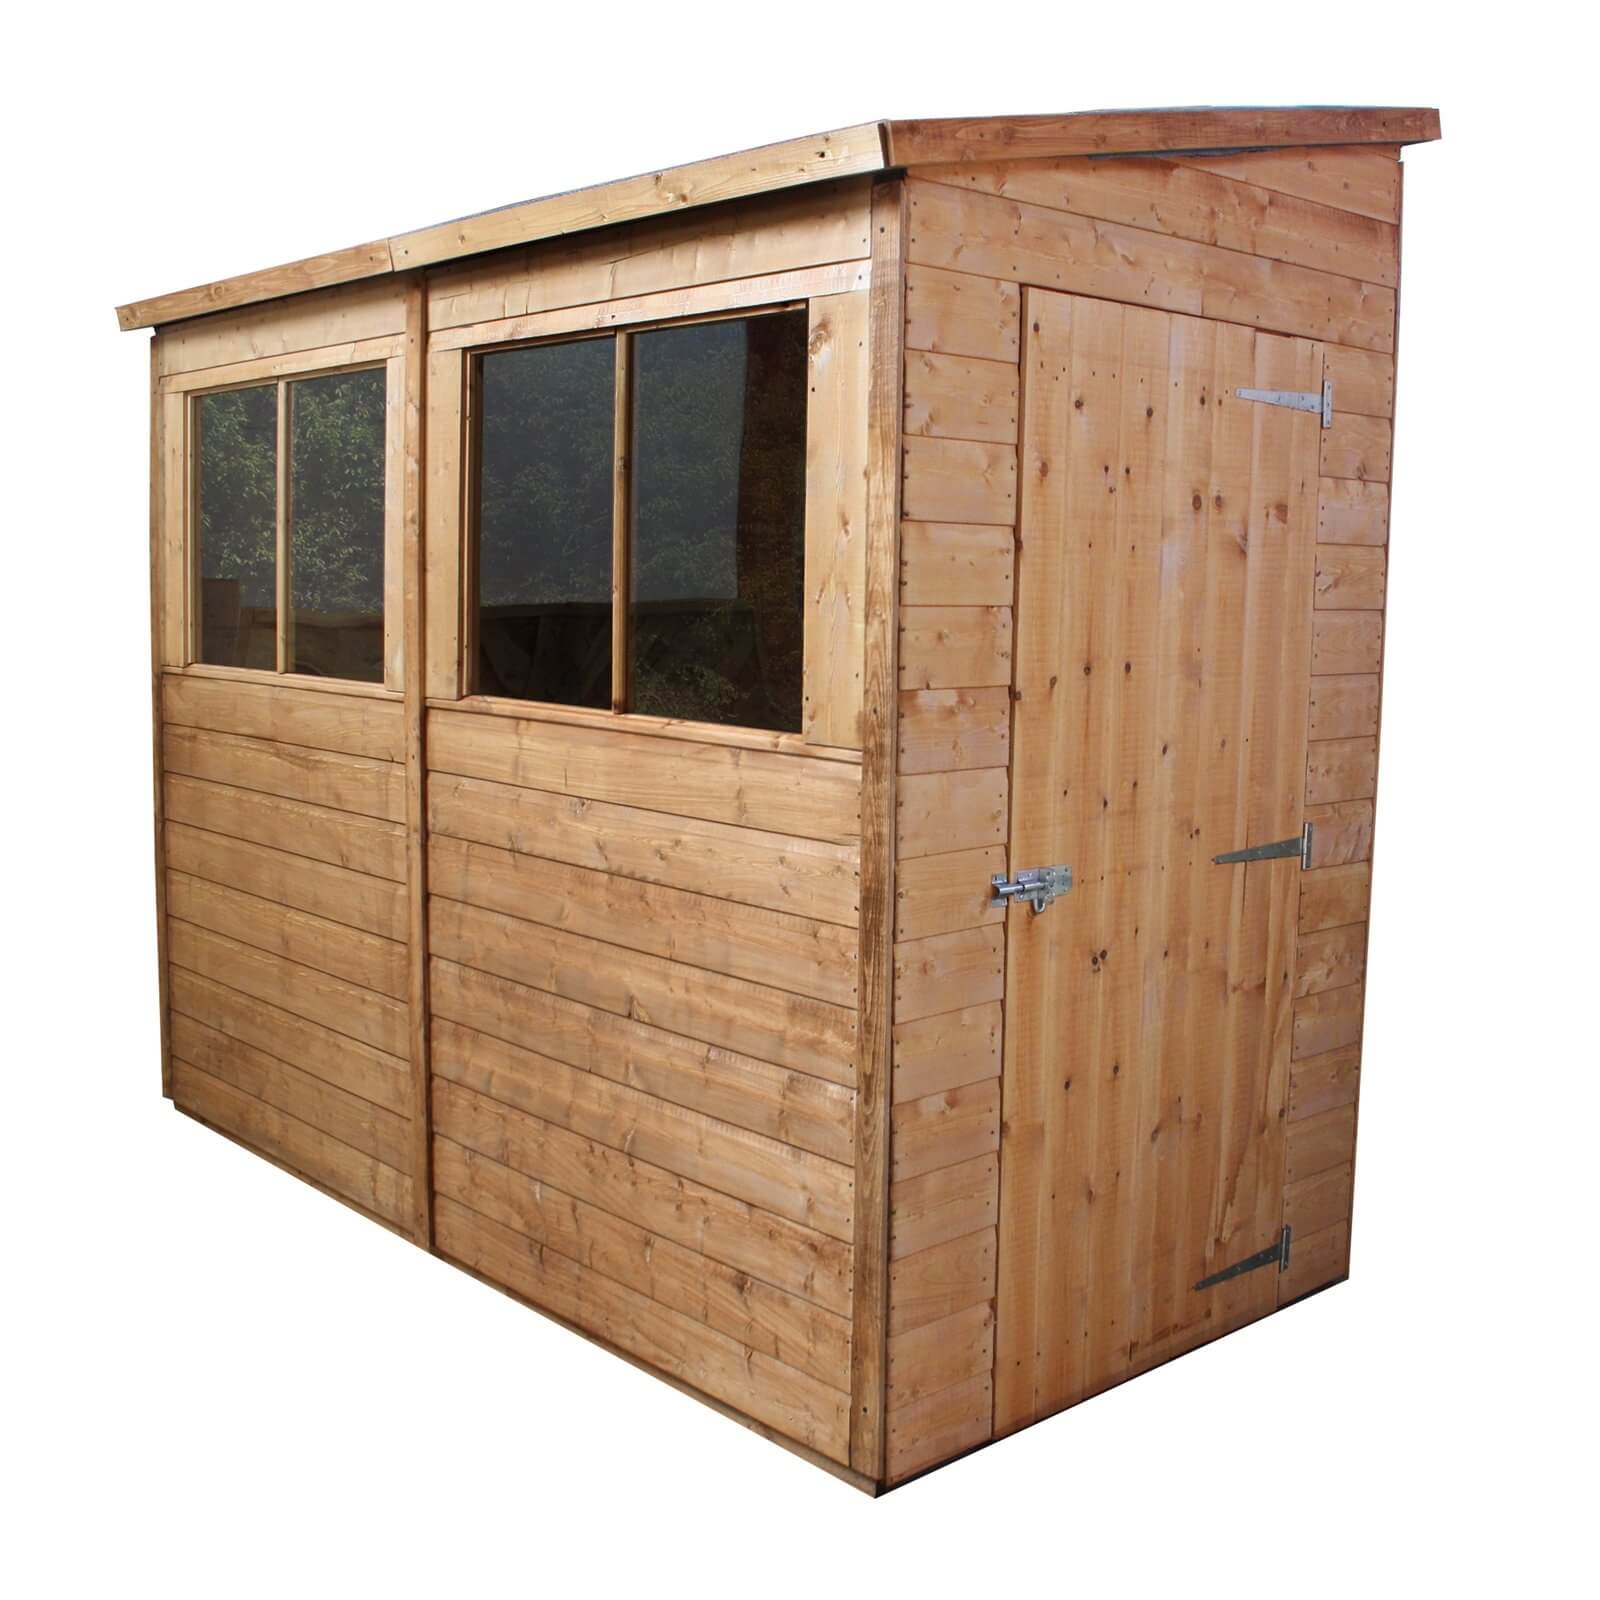 Mercia 8 x 4ft Premium Pent Wooden Shed